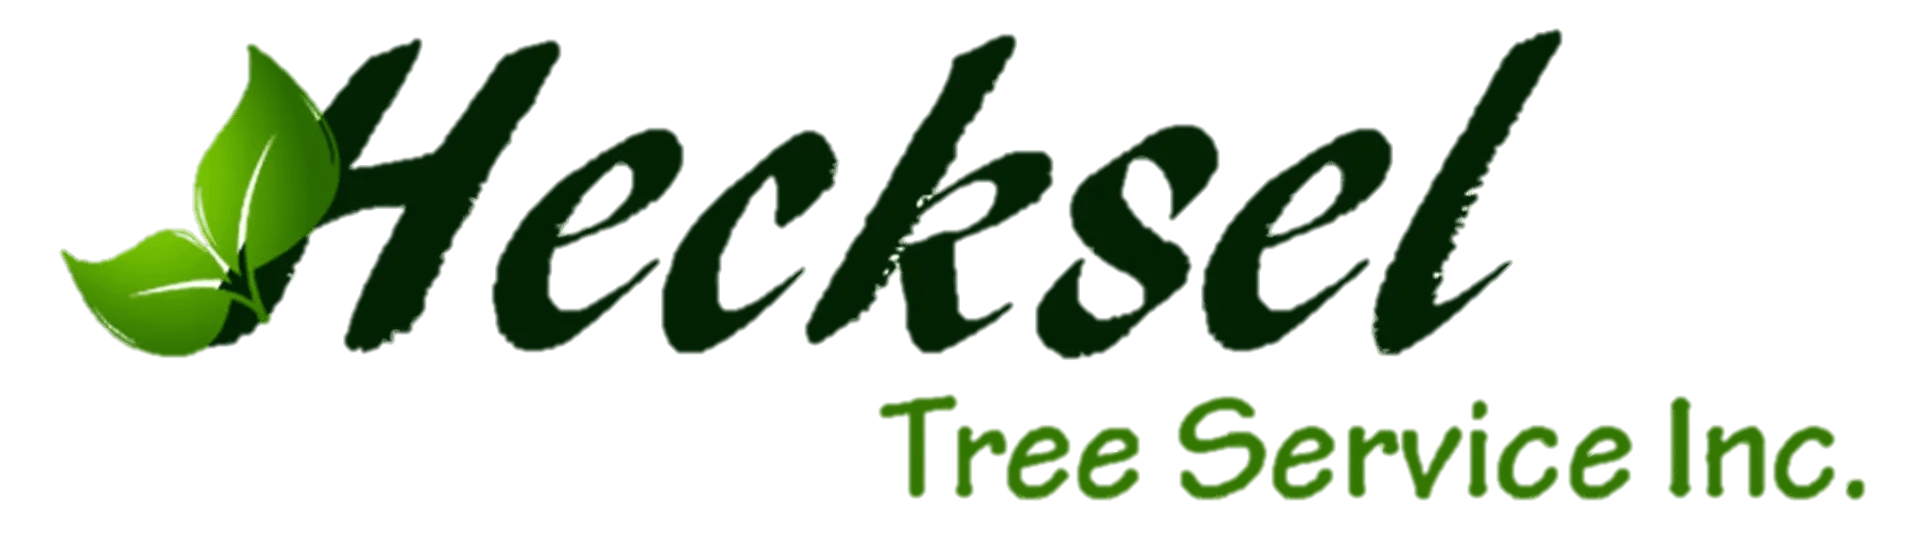 Hecksel Tree Trimming and Pruning